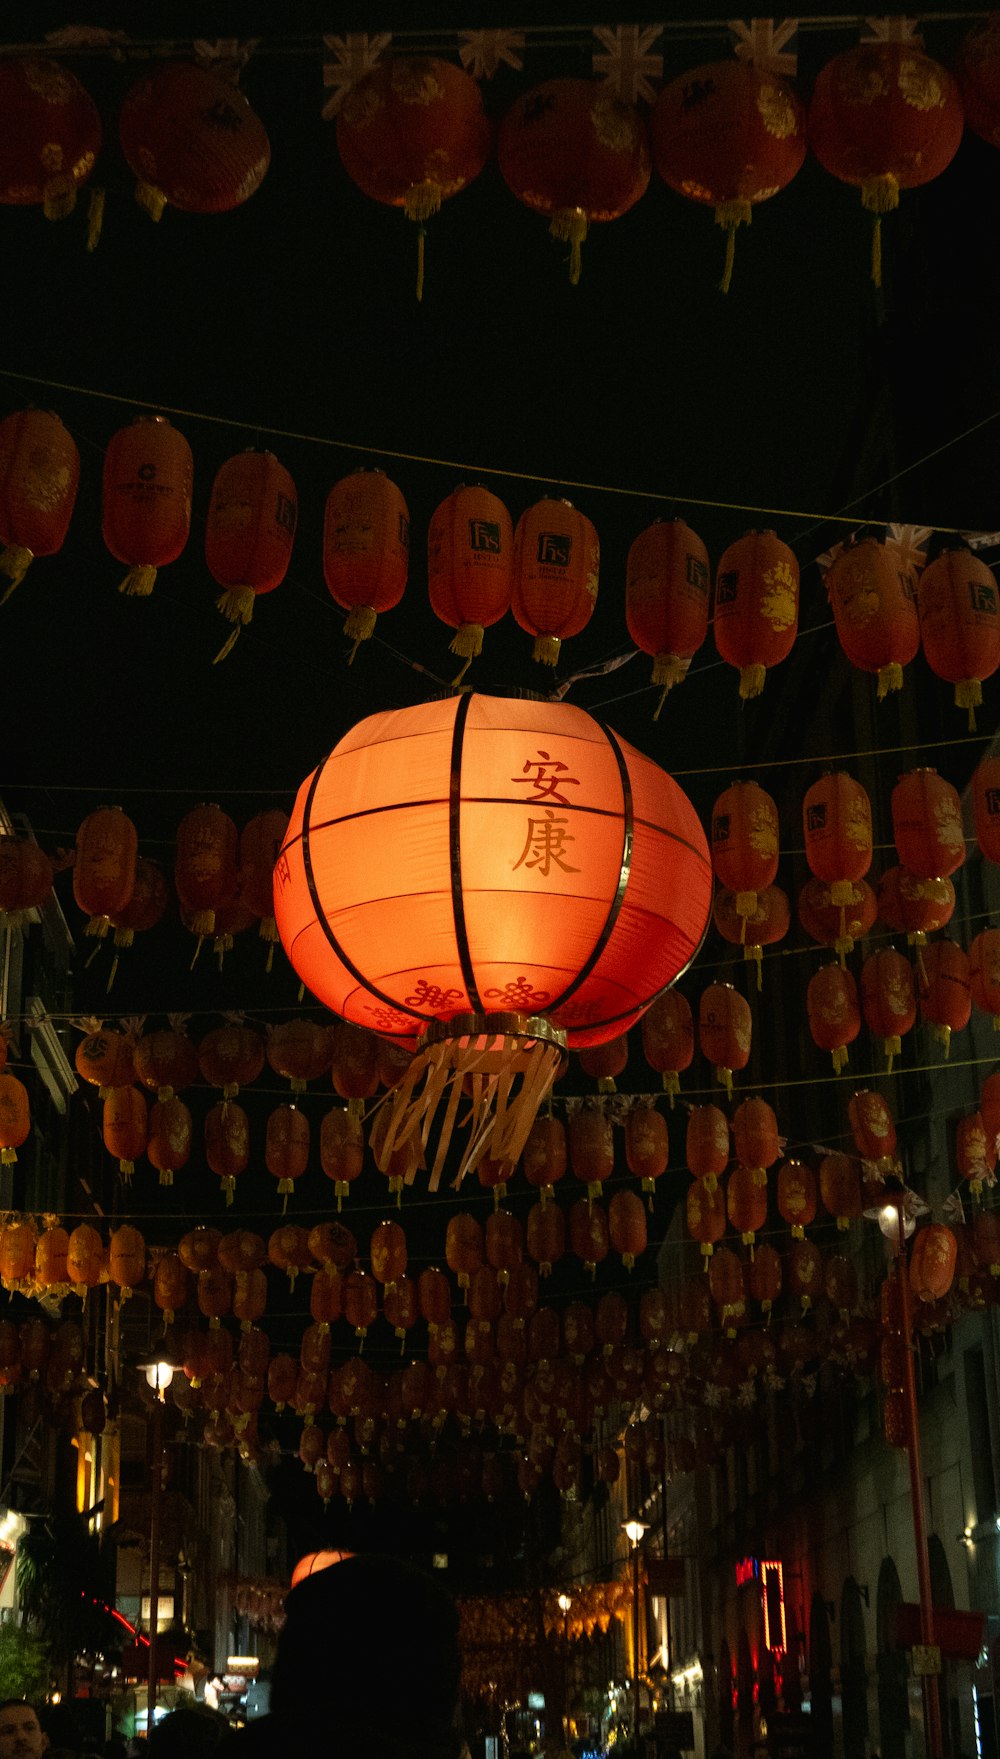 a group of lanterns hanging from the ceiling